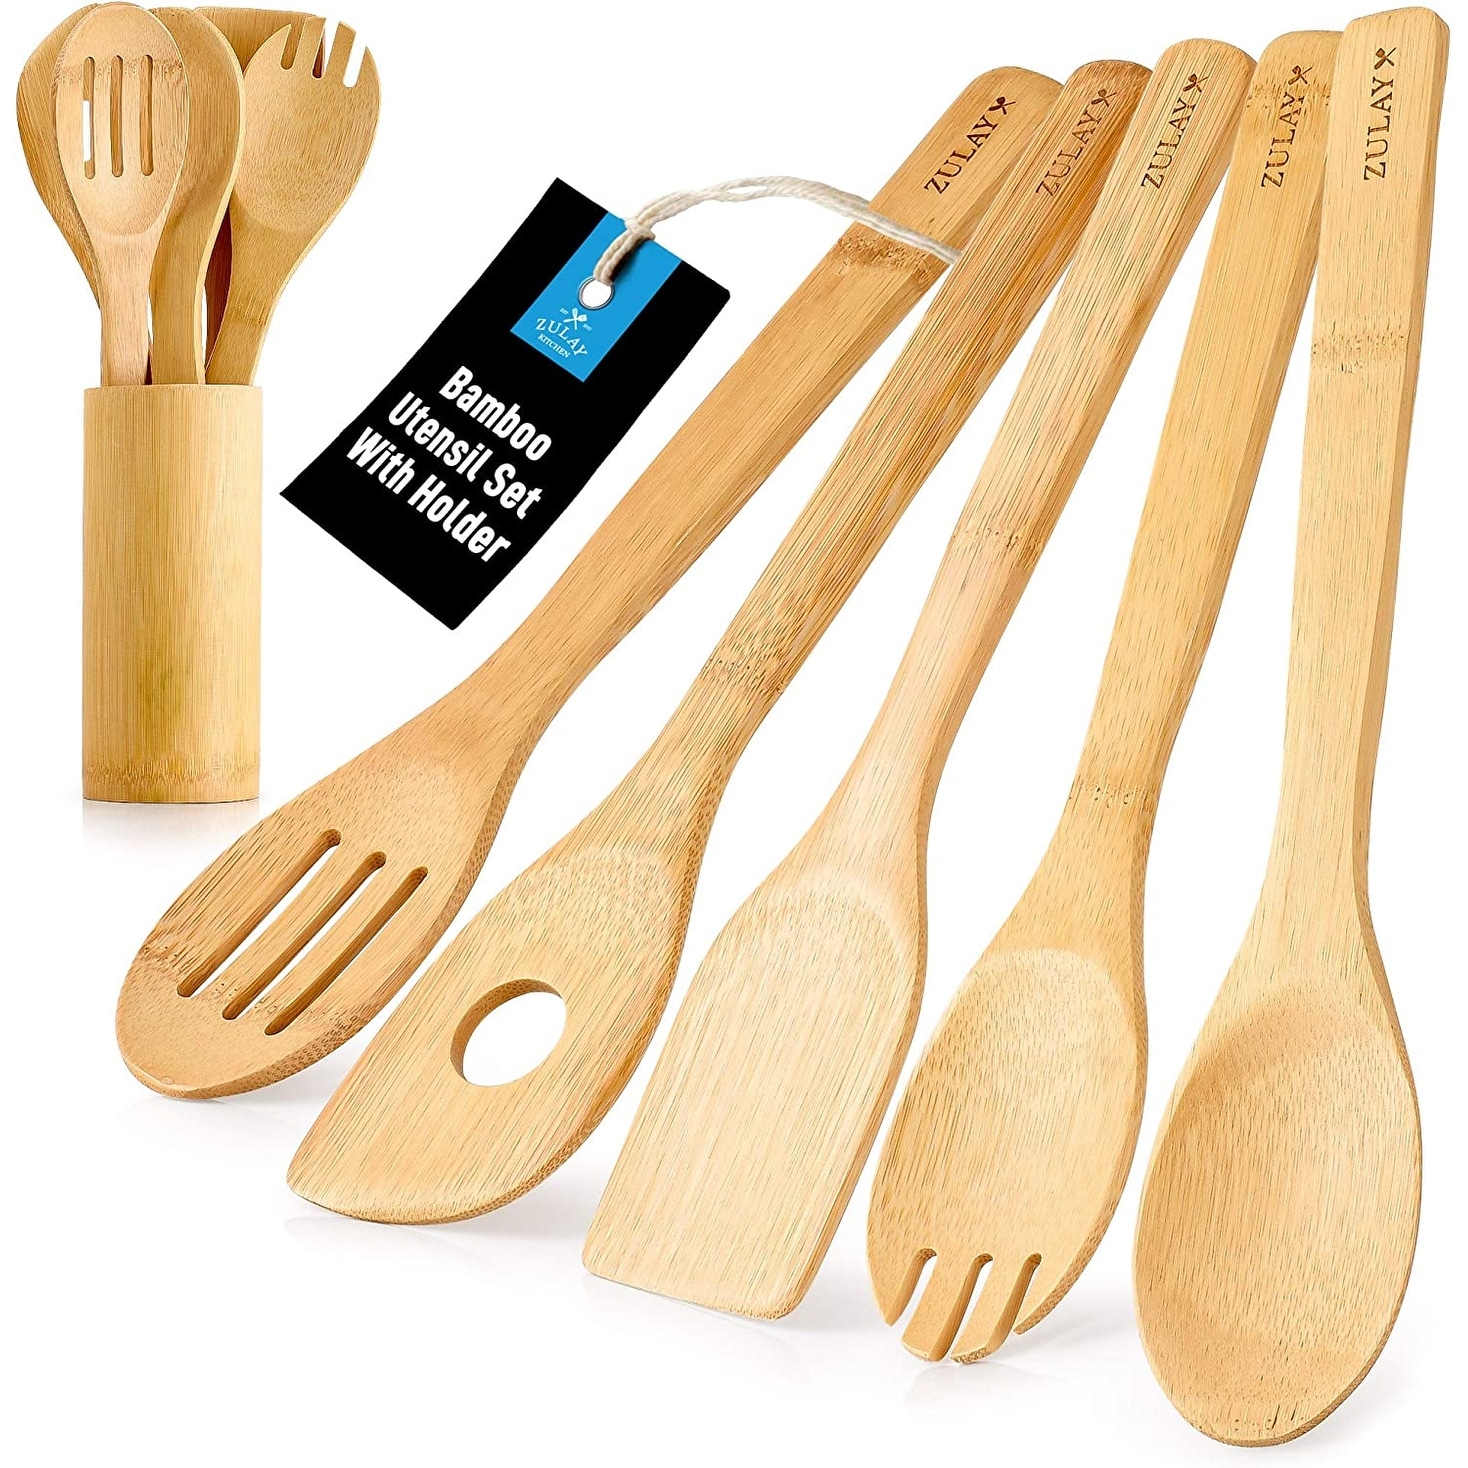 https://ak1.ostkcdn.com/images/products/is/images/direct/c209aecb3adb9c875f774347e42dcacd5a91432e/Zulay-Bamboo-Utensil-Set-with-Holder---6-Pieces.jpg